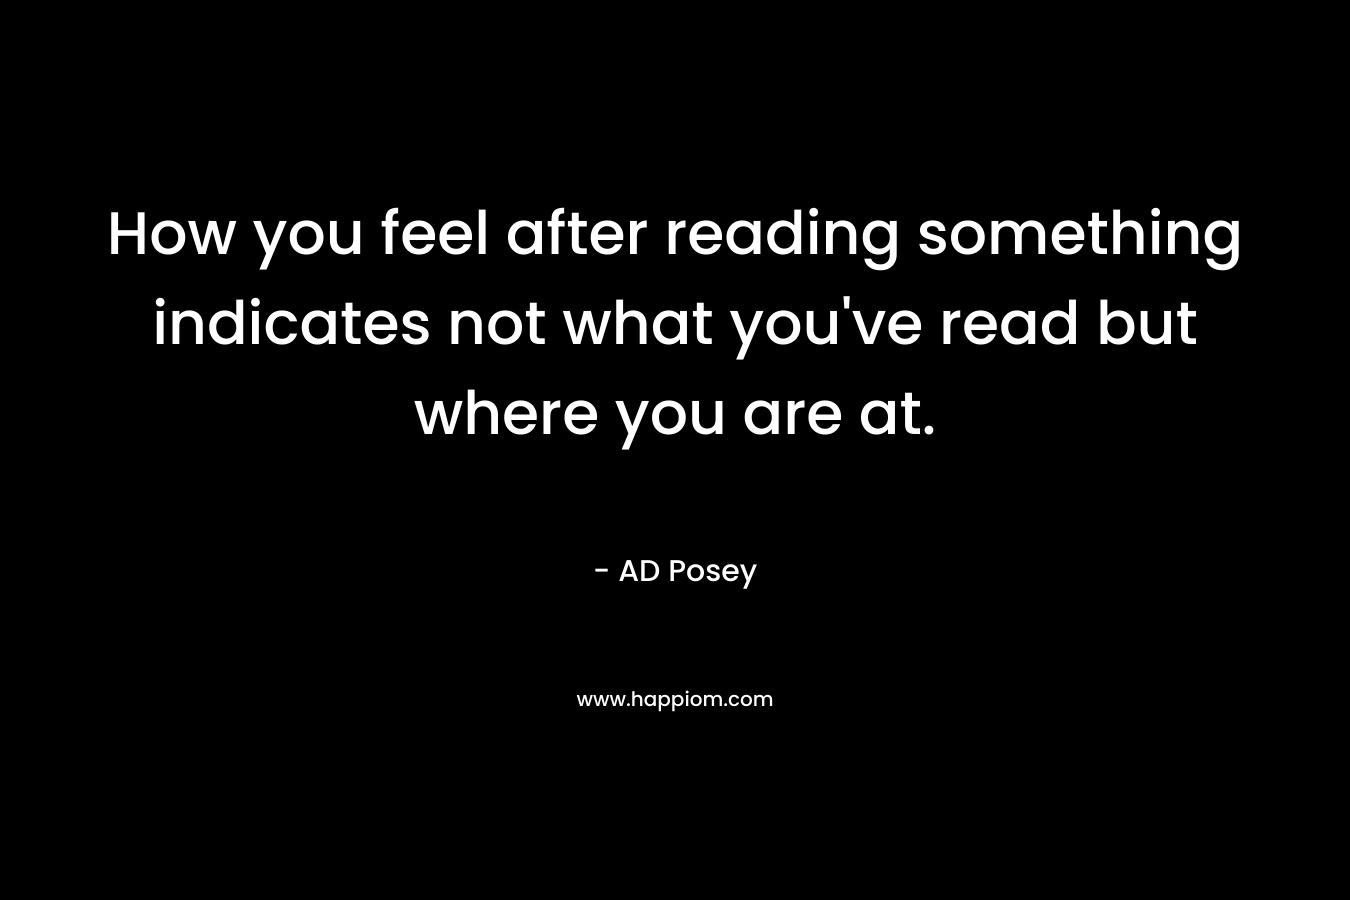 How you feel after reading something indicates not what you’ve read but where you are at. – AD Posey